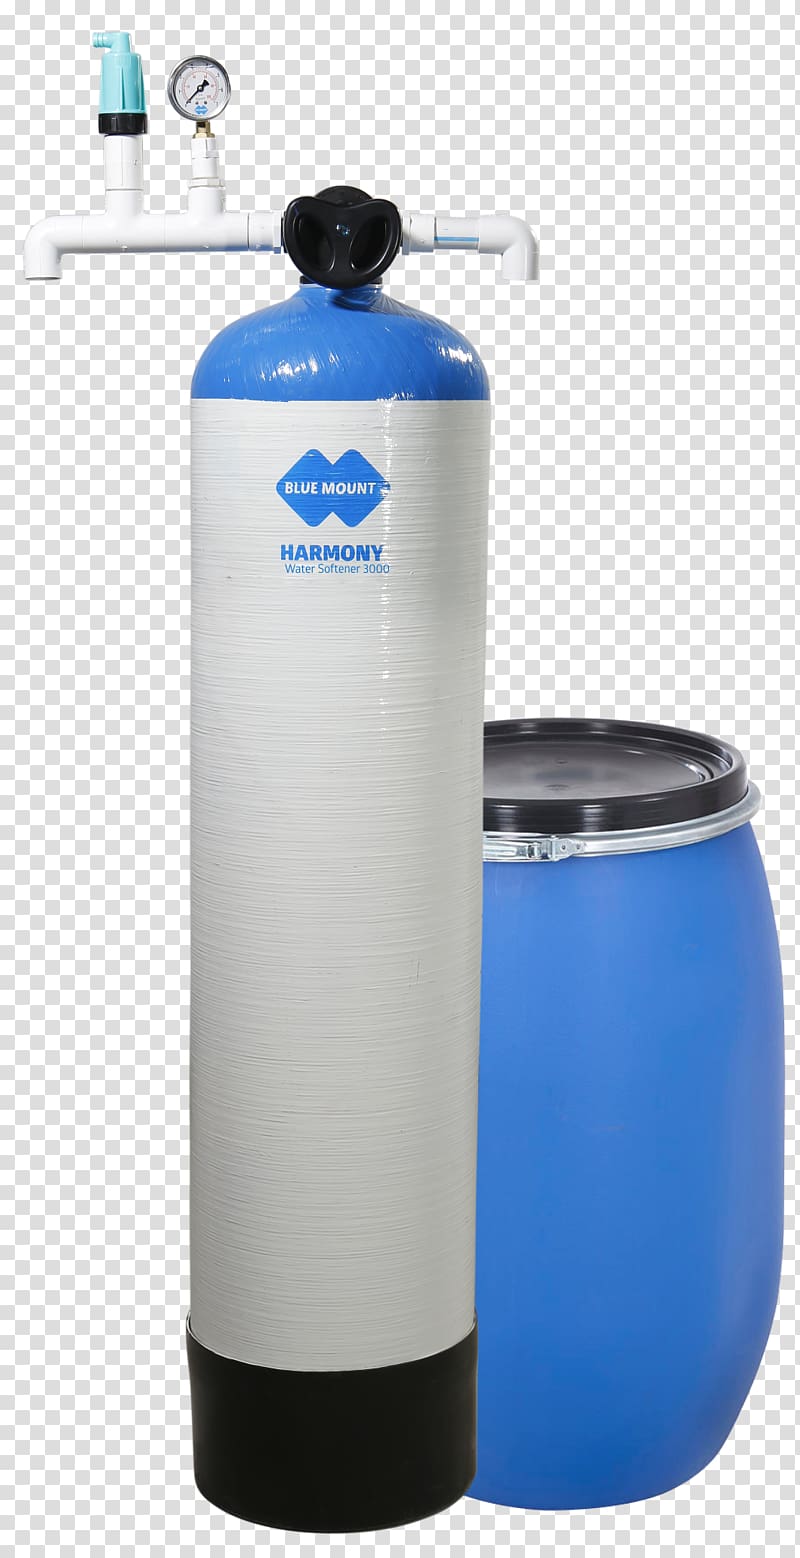 Water Filter Water softening Water purification Water tank, water transparent background PNG clipart